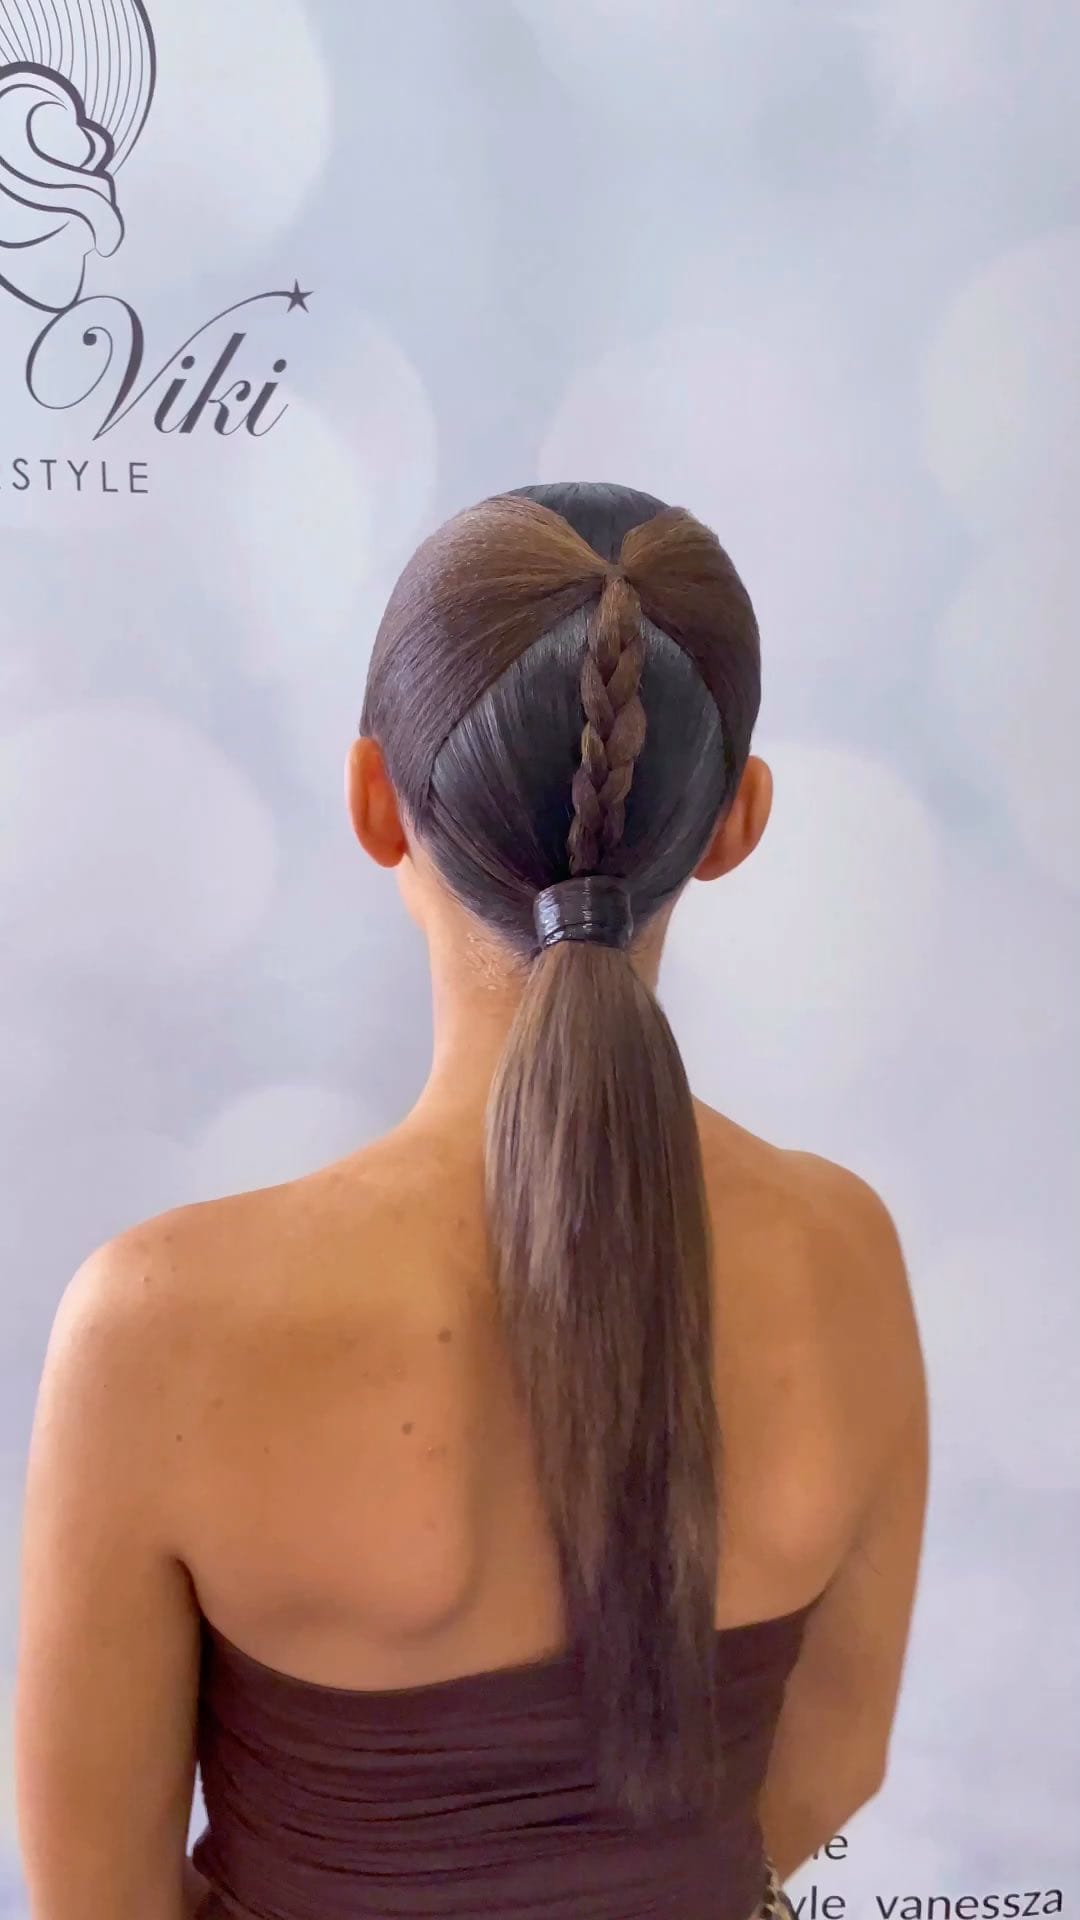 Neat ponytail with center braid adding a polished touch